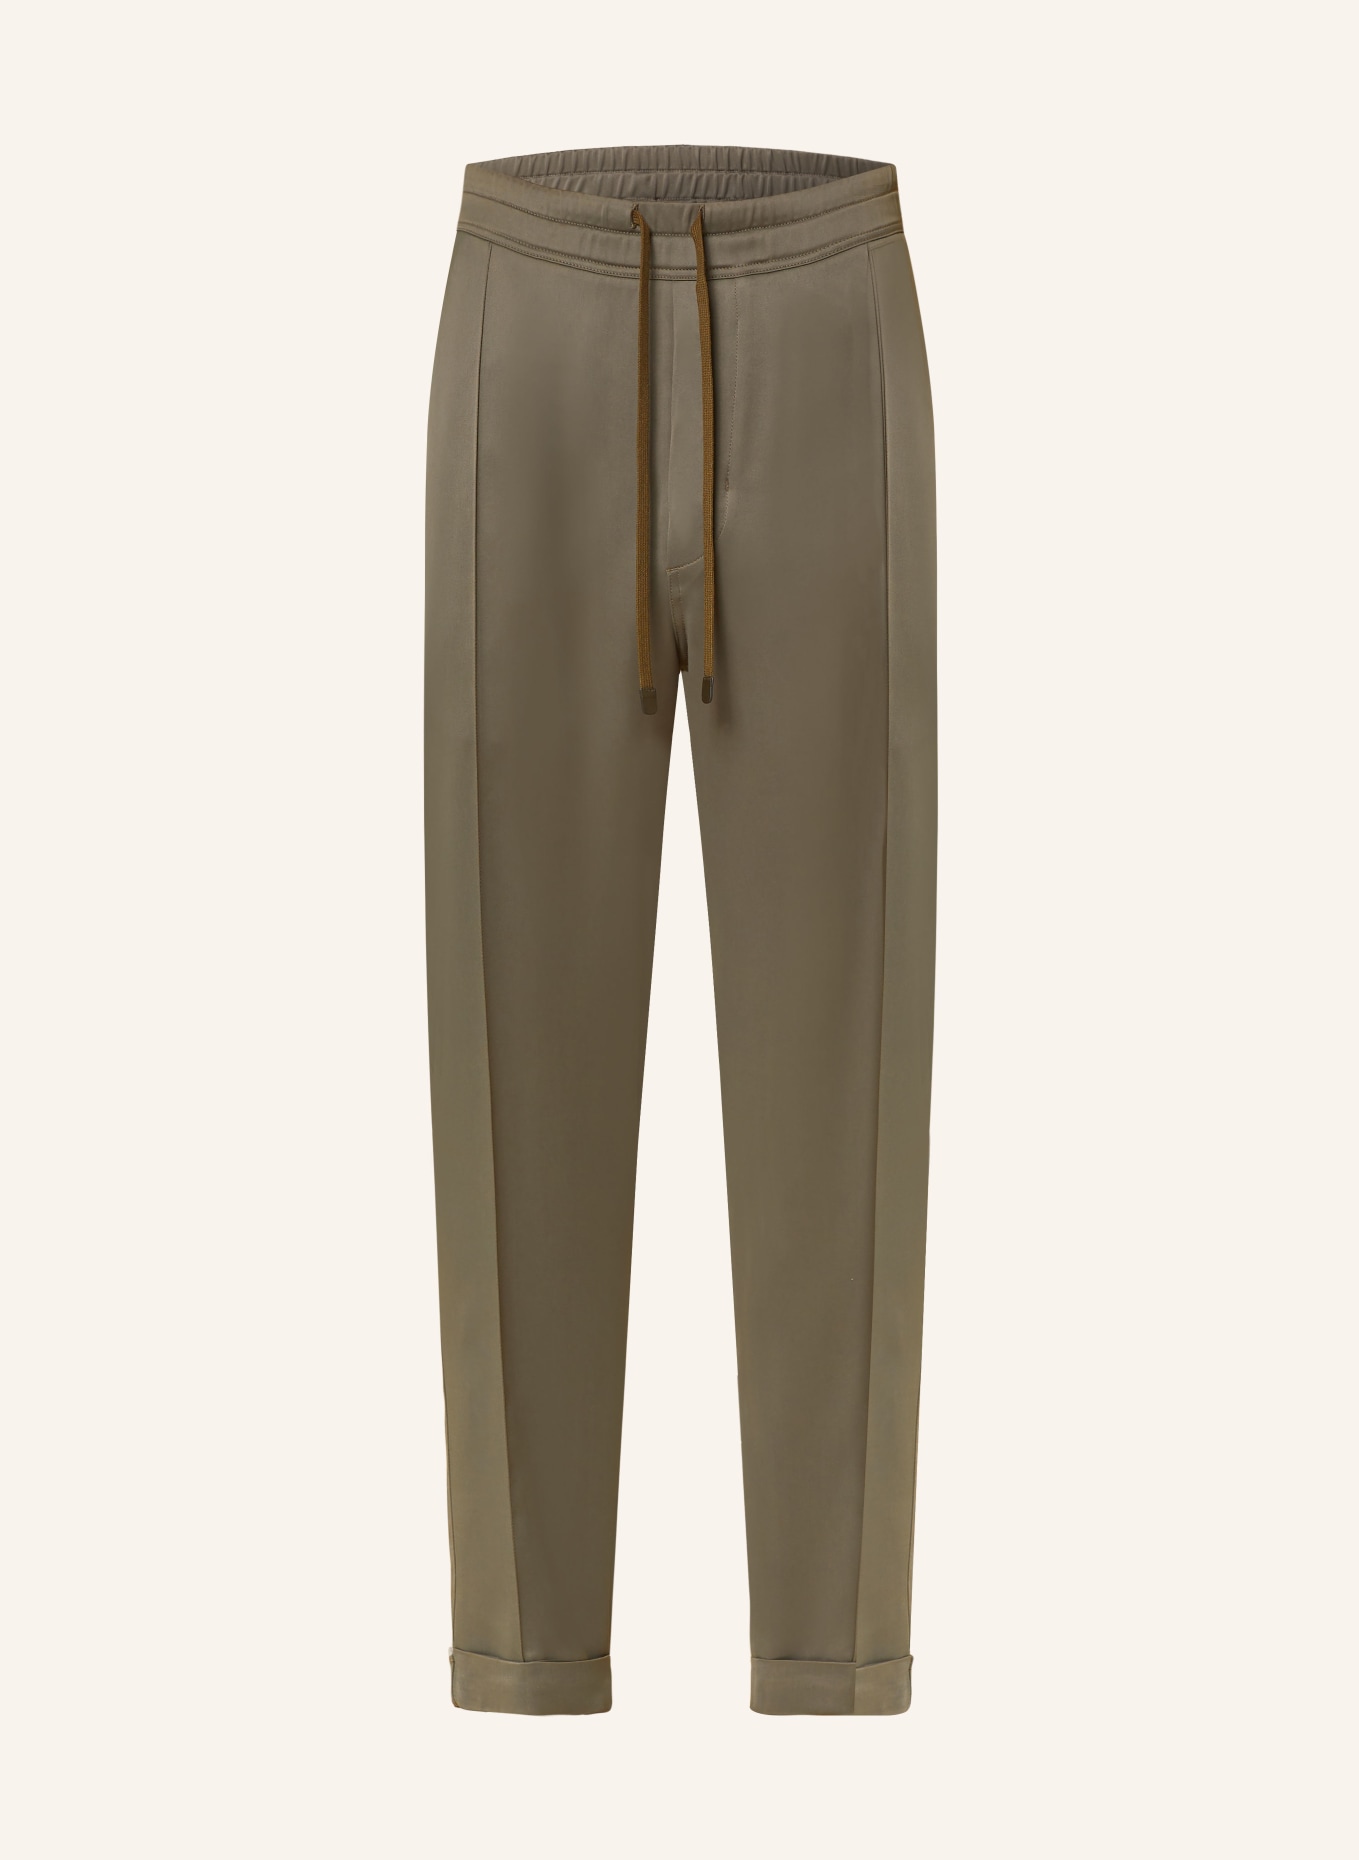 TOM FORD Pants in jogger style slim fit, Color: KHAKI (Image 1)